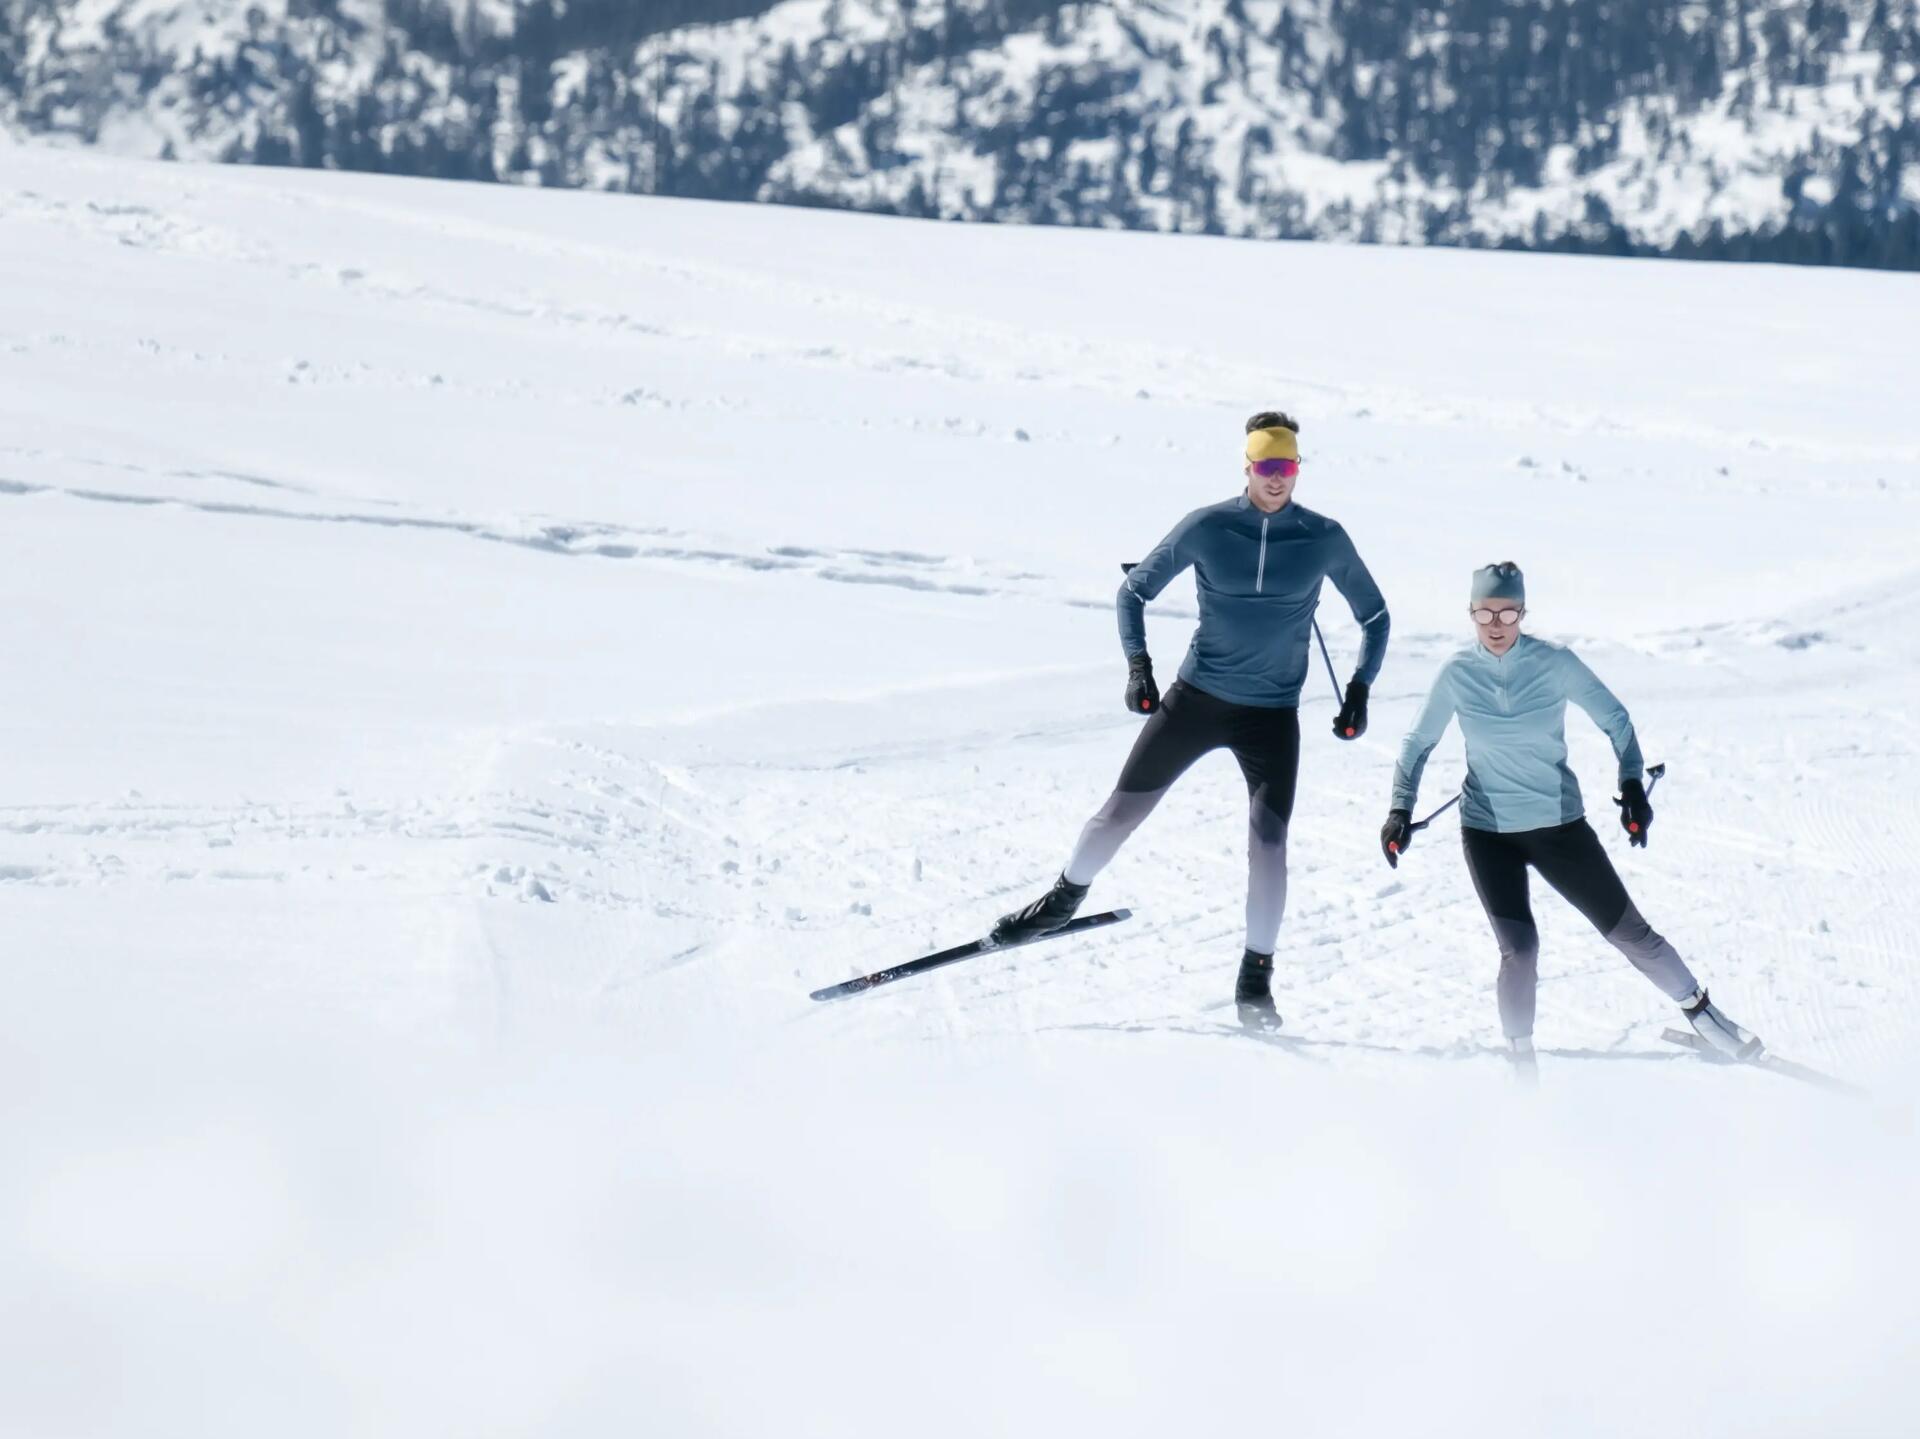 WARMUP/STRETCHING THE RIGHT ACTIONS FOR A CROSS-COUNTRY SKIING SESSION